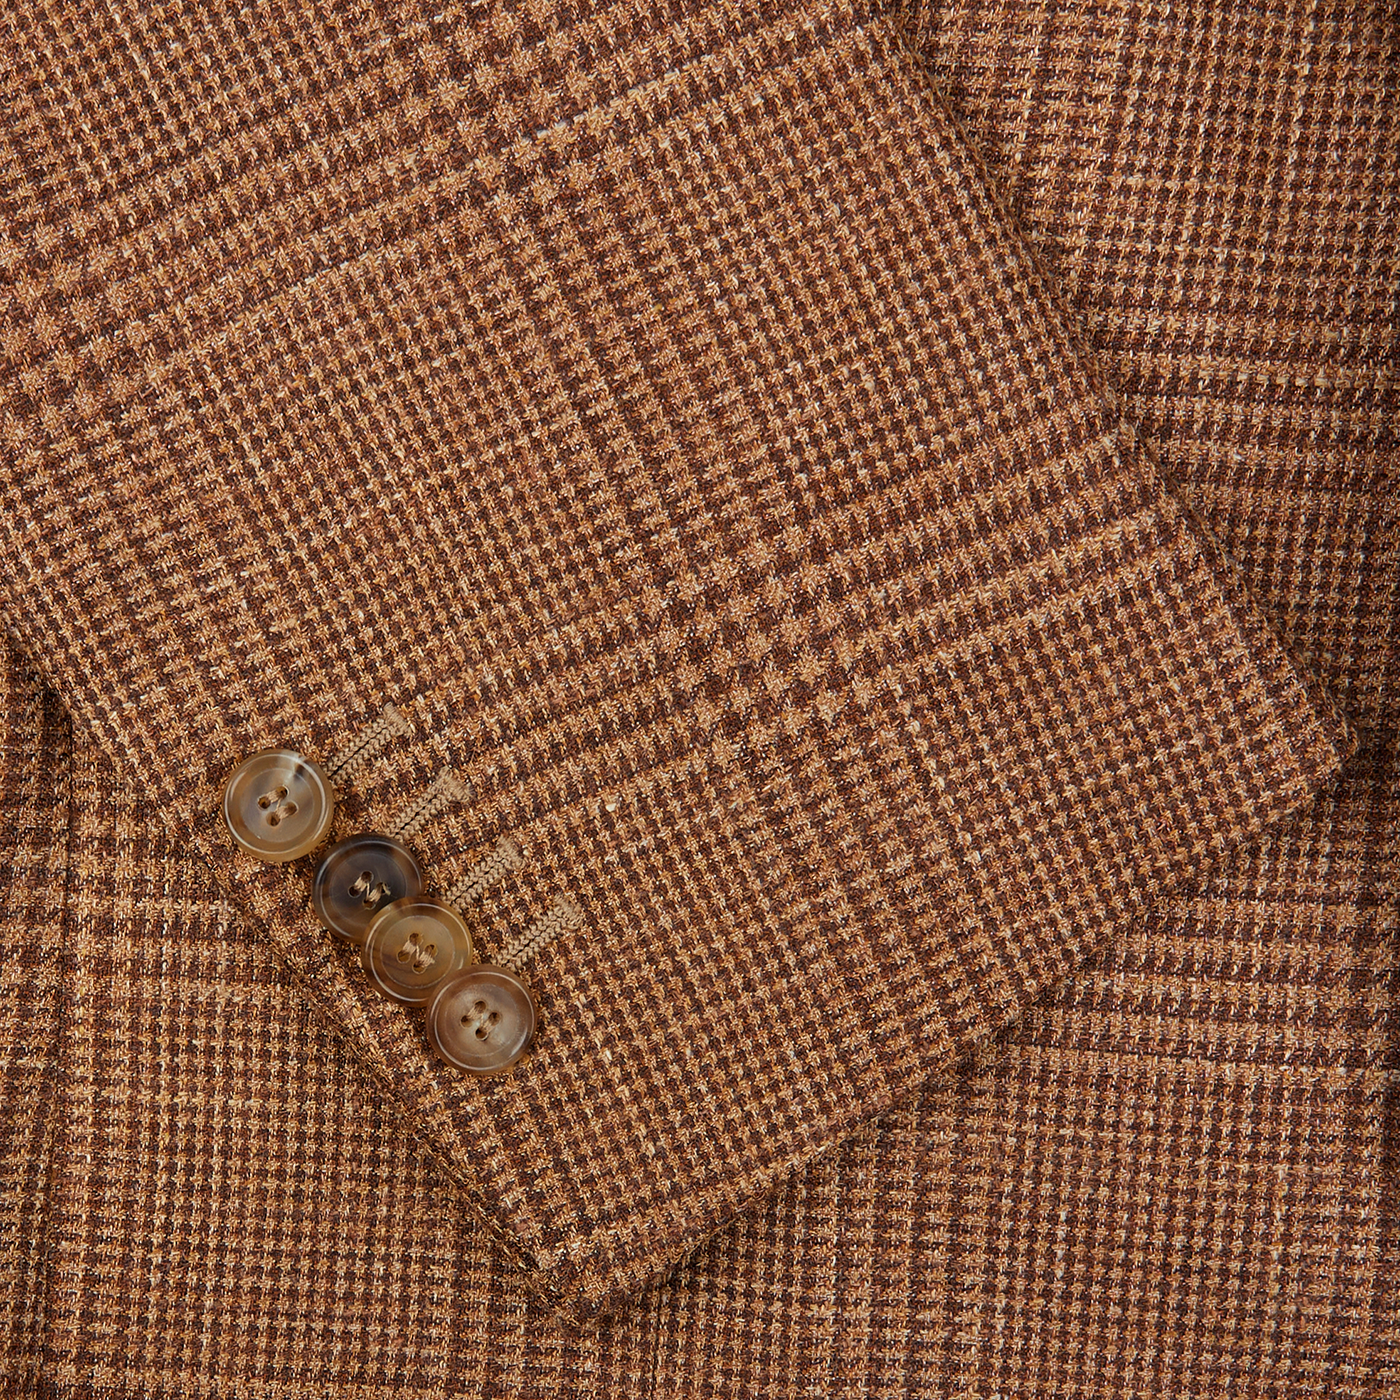 Close-up of a De Petrillo Brown Checked Wool Silk Linen Posillipo Blazer with brown buttons.